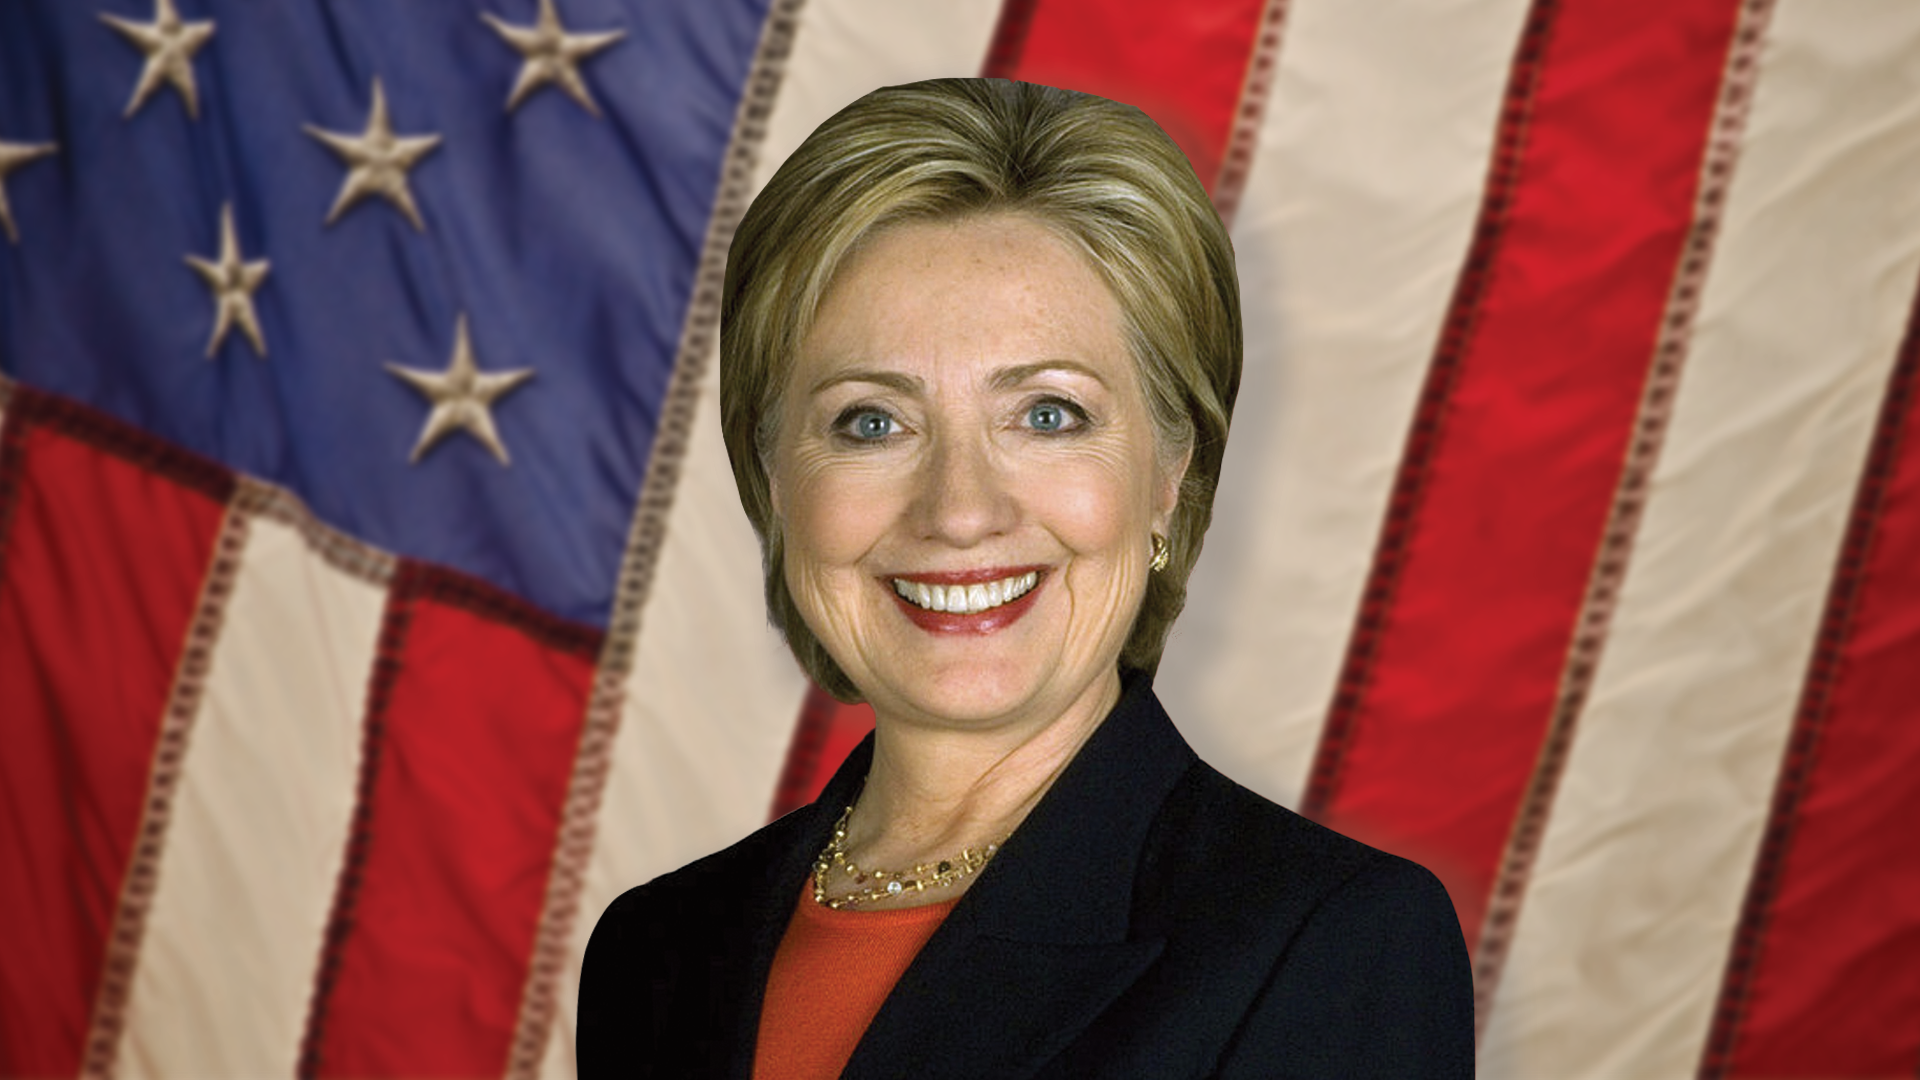 A tribute to Hilary Clinton